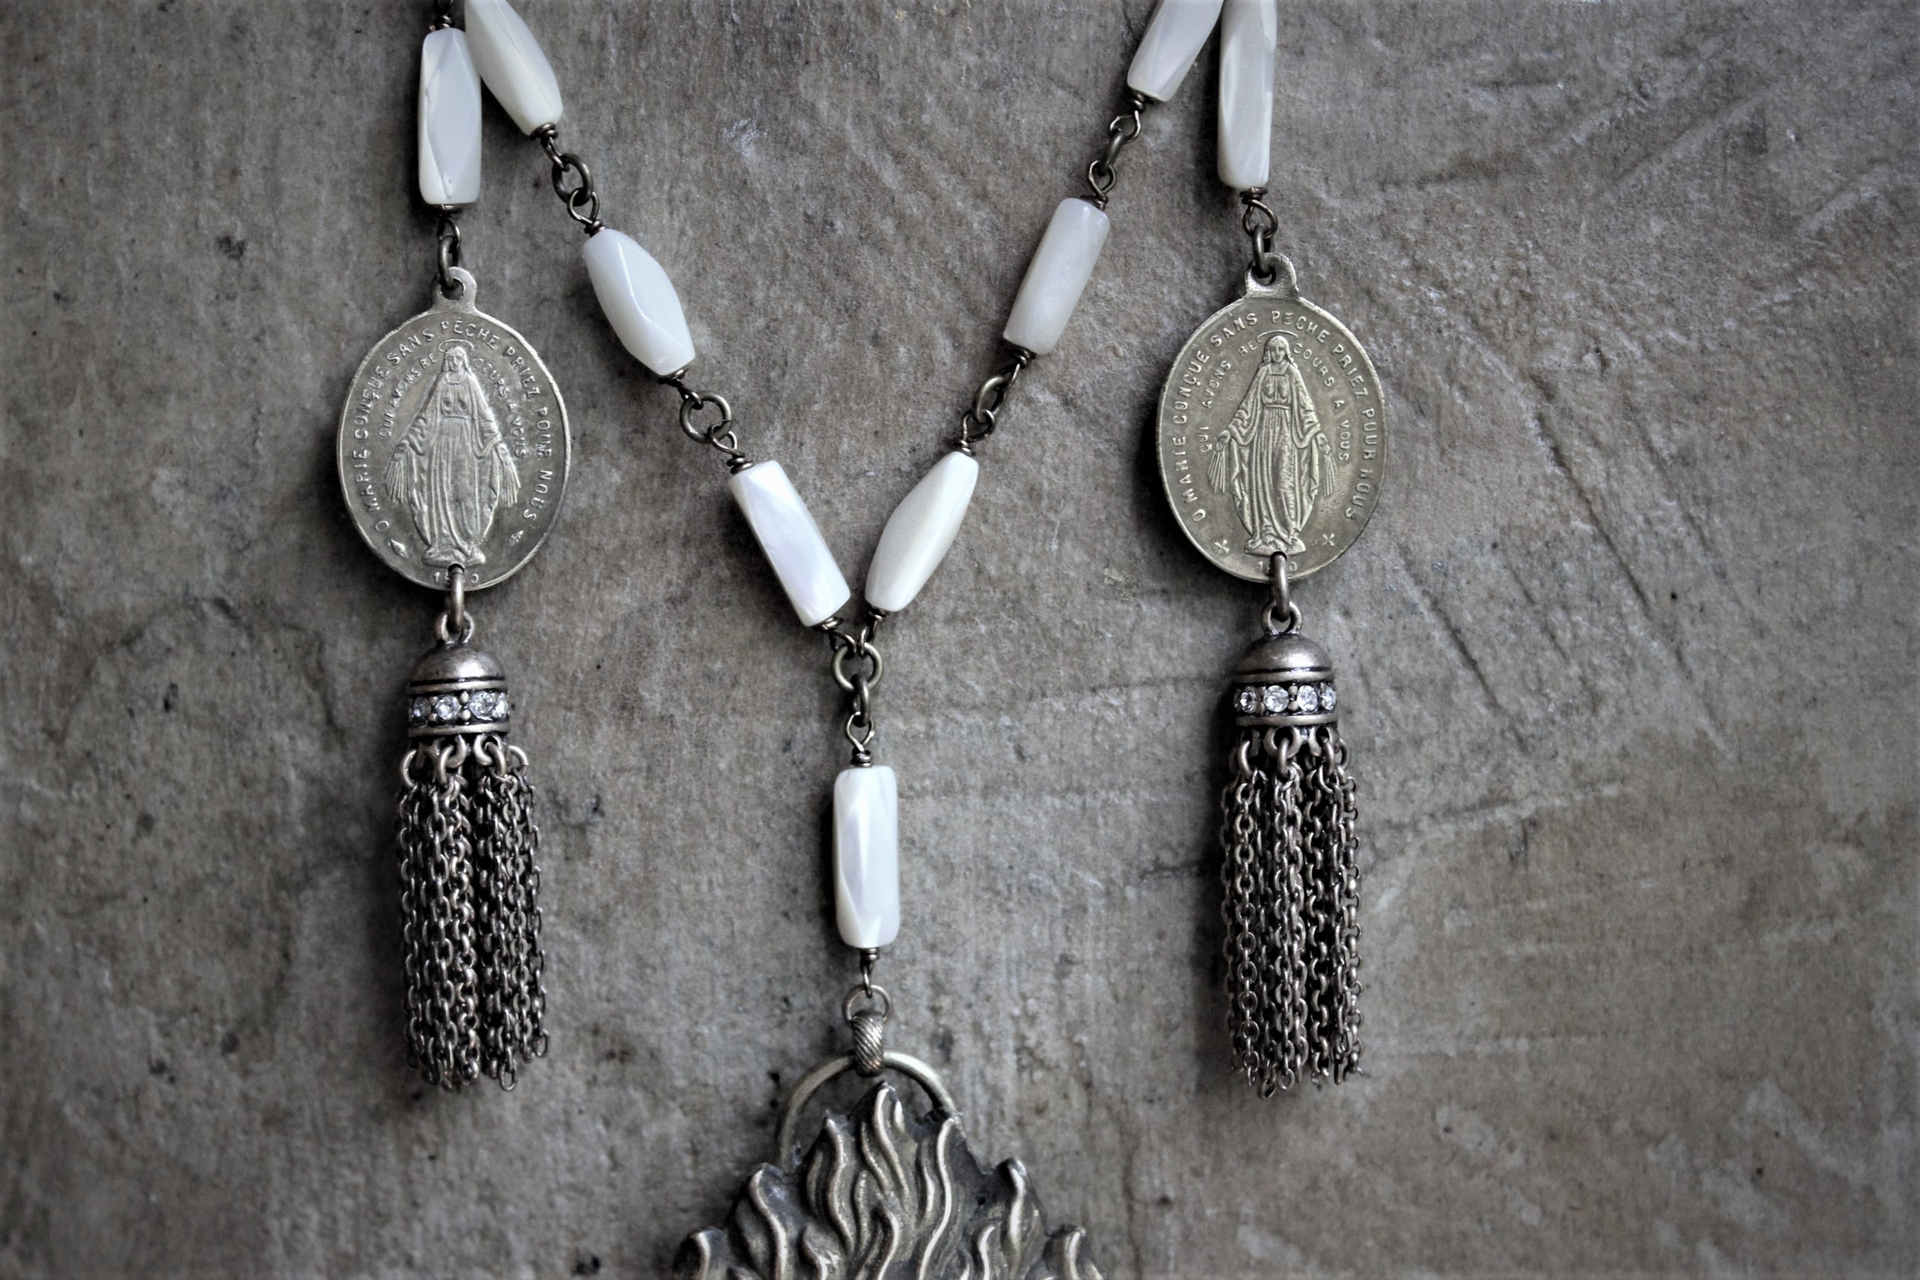 With Me Necklace Set w/Antique French Engraved Saint Anne Ex Voto Locket, Antique French Immaculate Mary Medals,Antique MOP Chain, Antique Chain Tassels